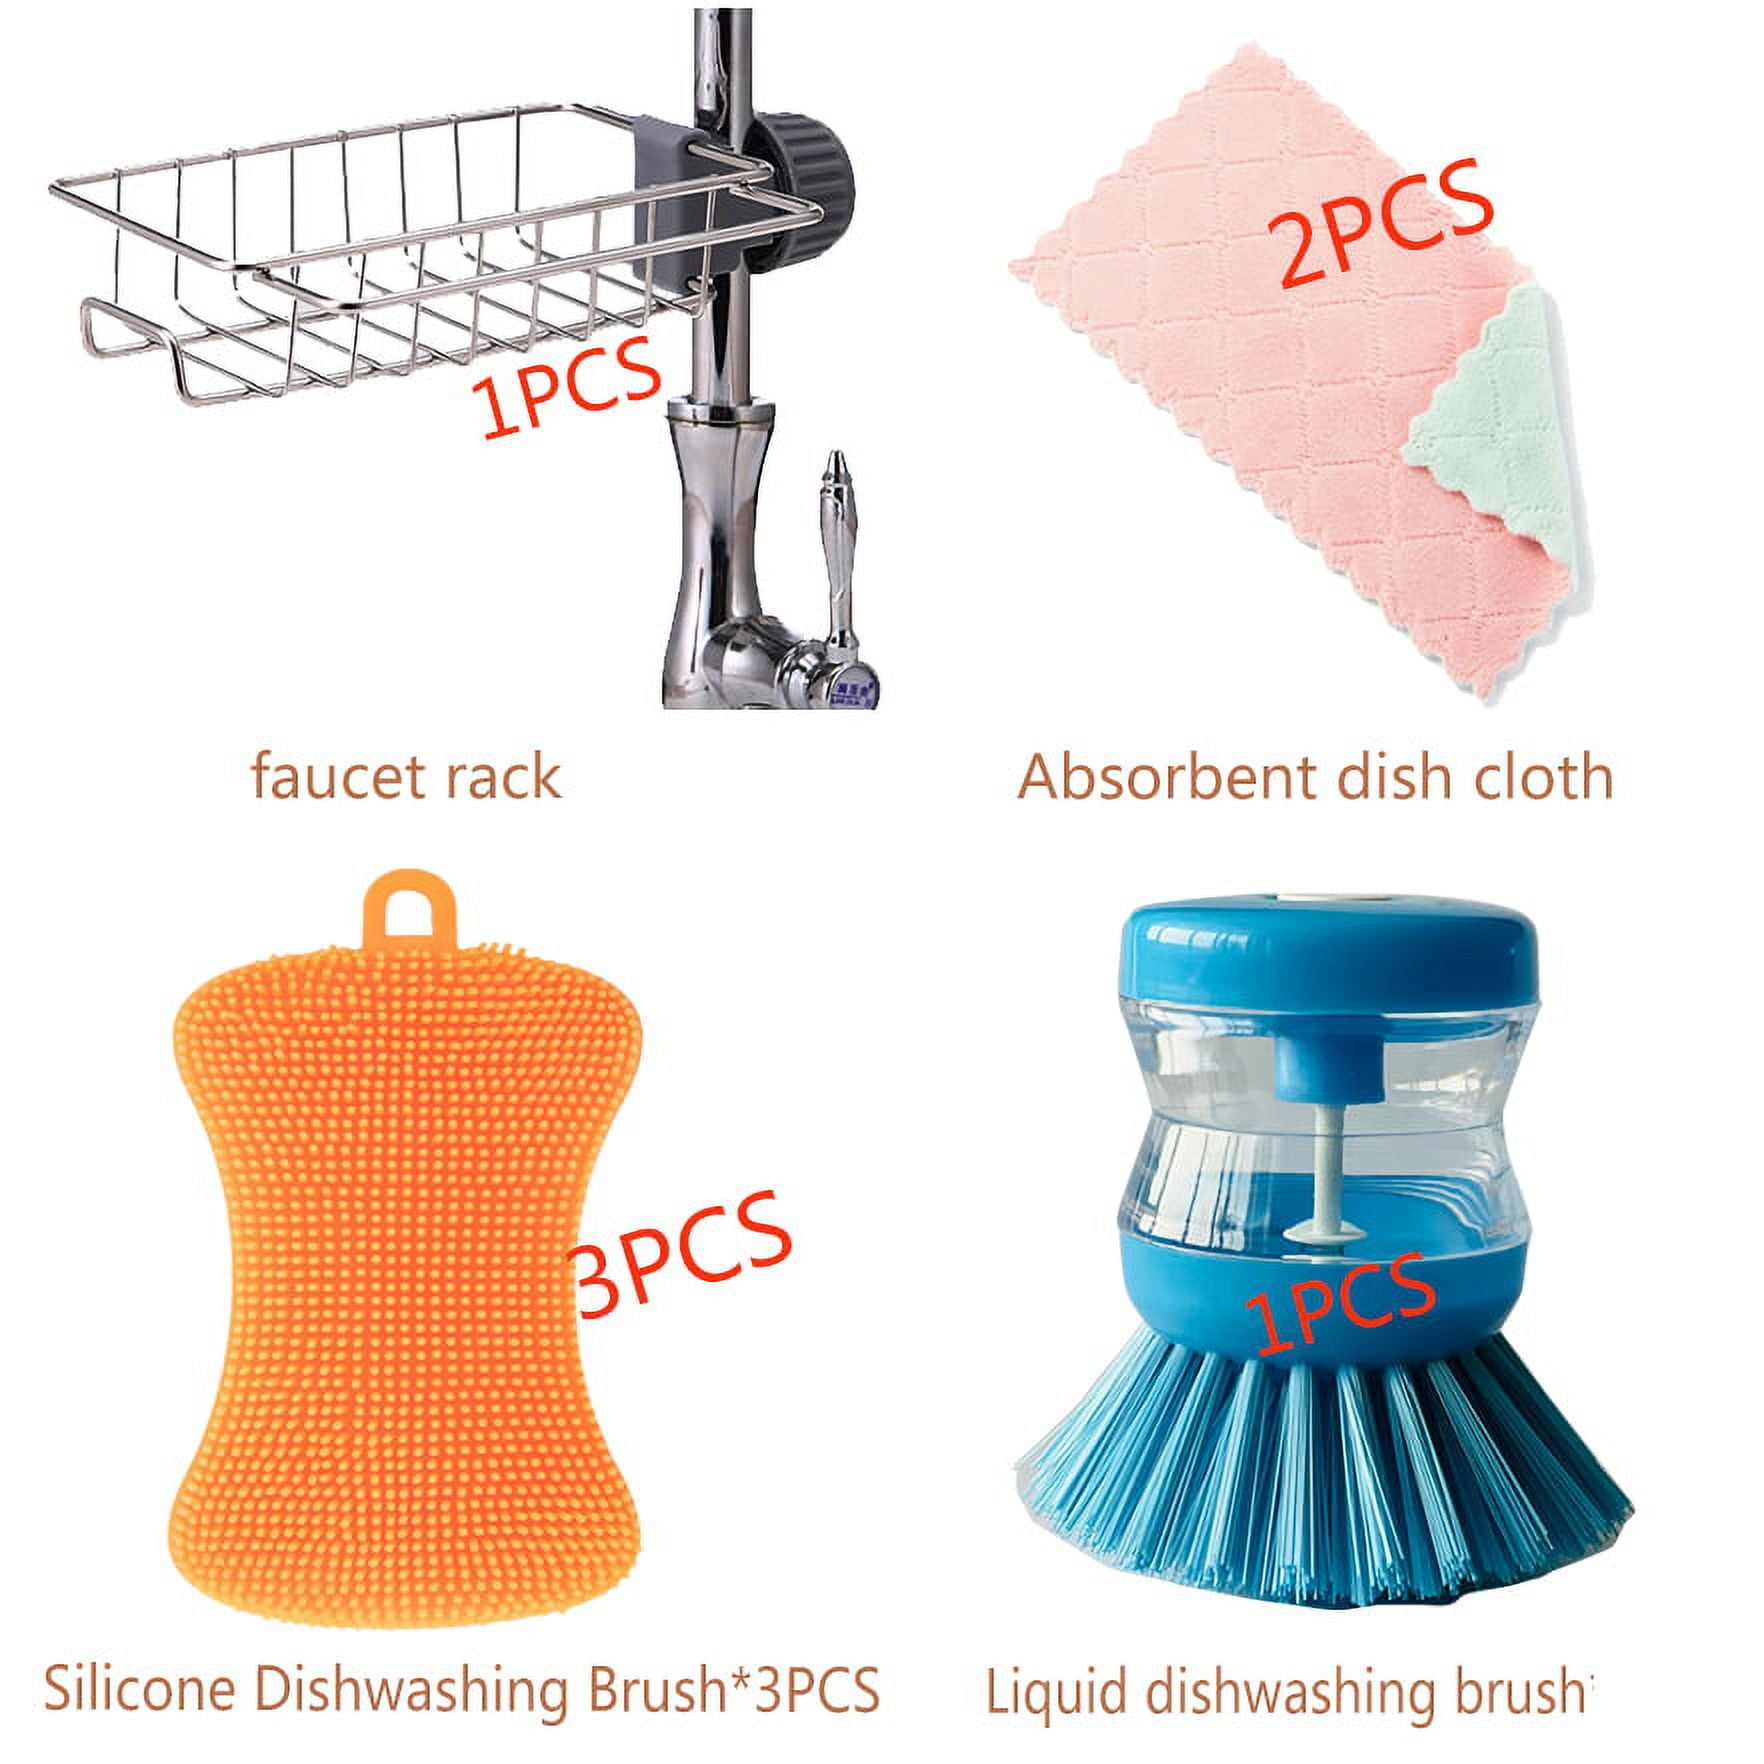 Dish Cloths, Sponges and Scrub Brushes